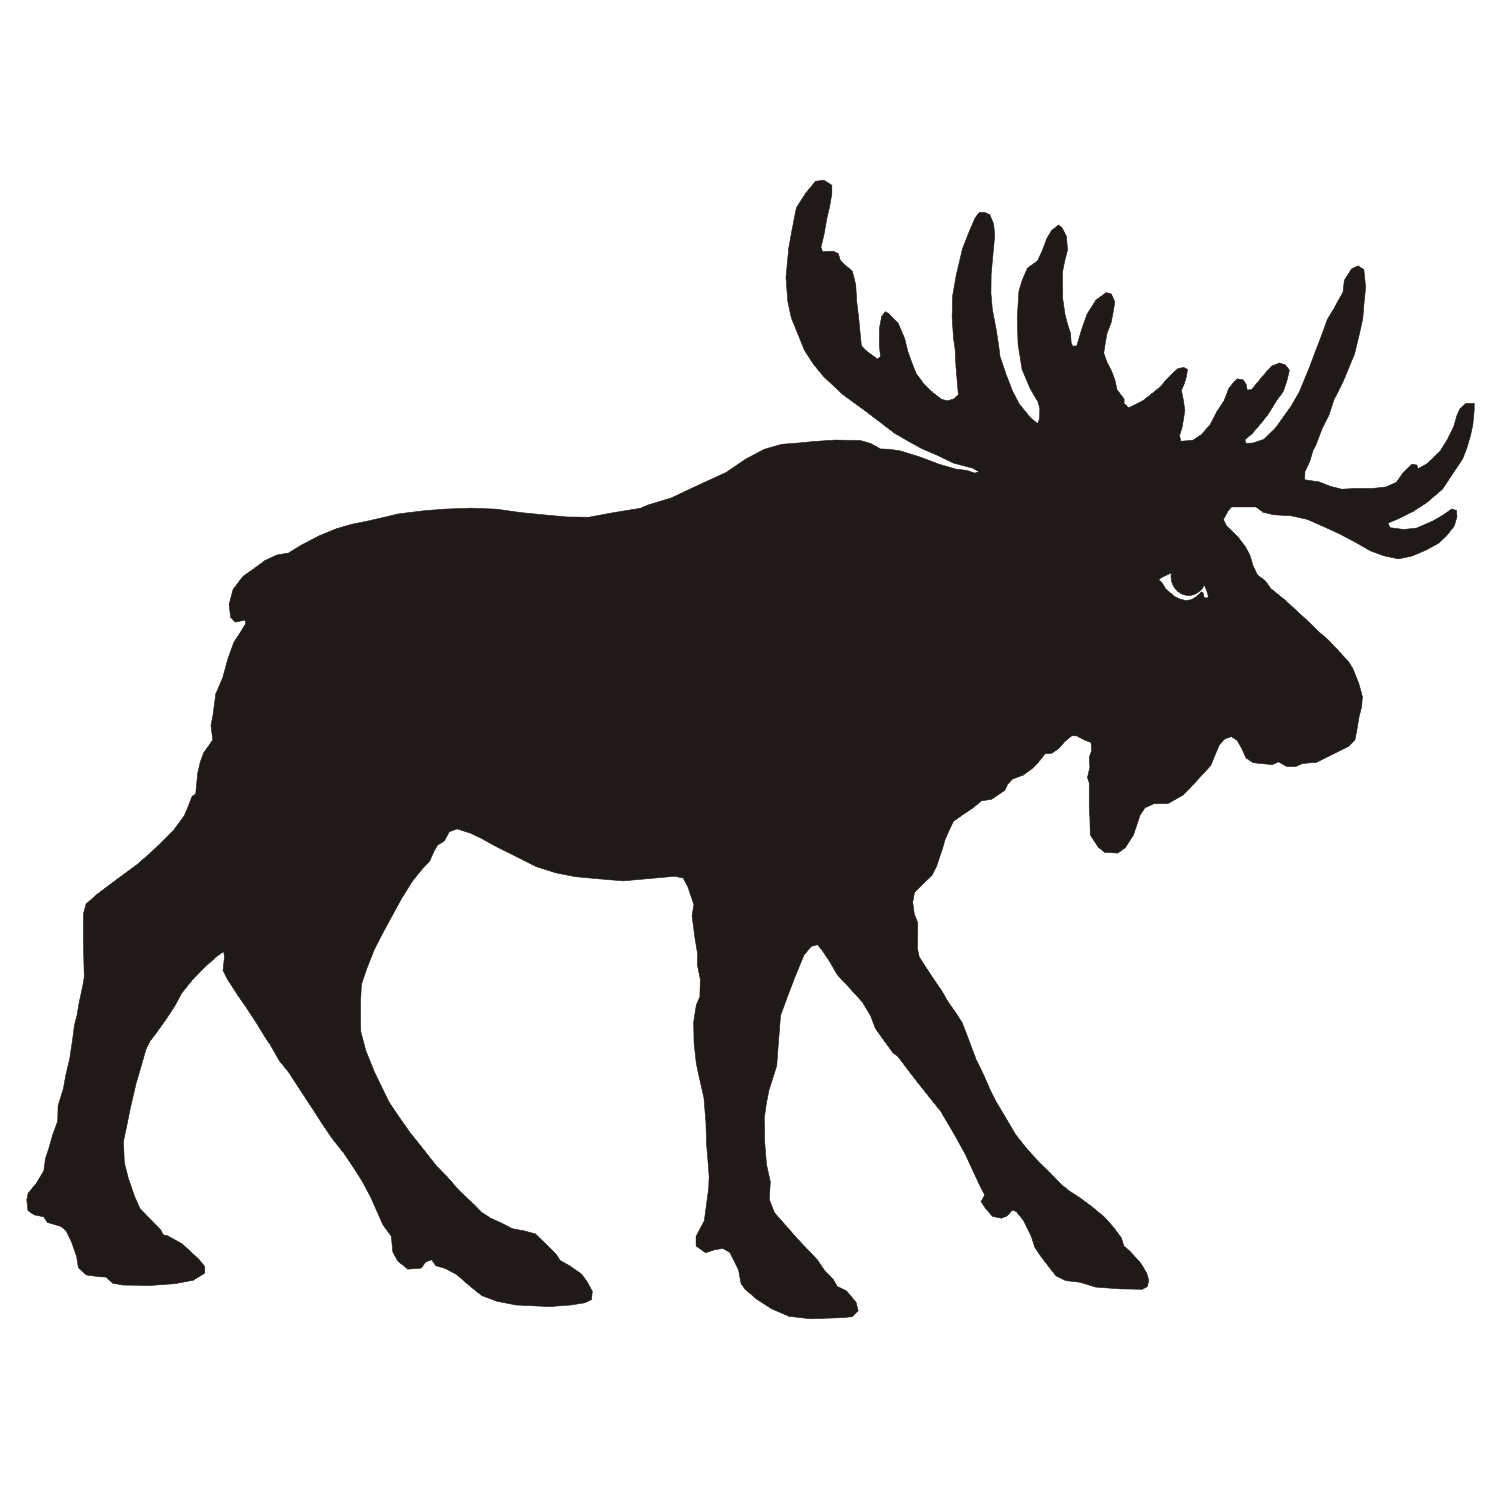 Moose Silhouette Vector Free - ClipArt Best